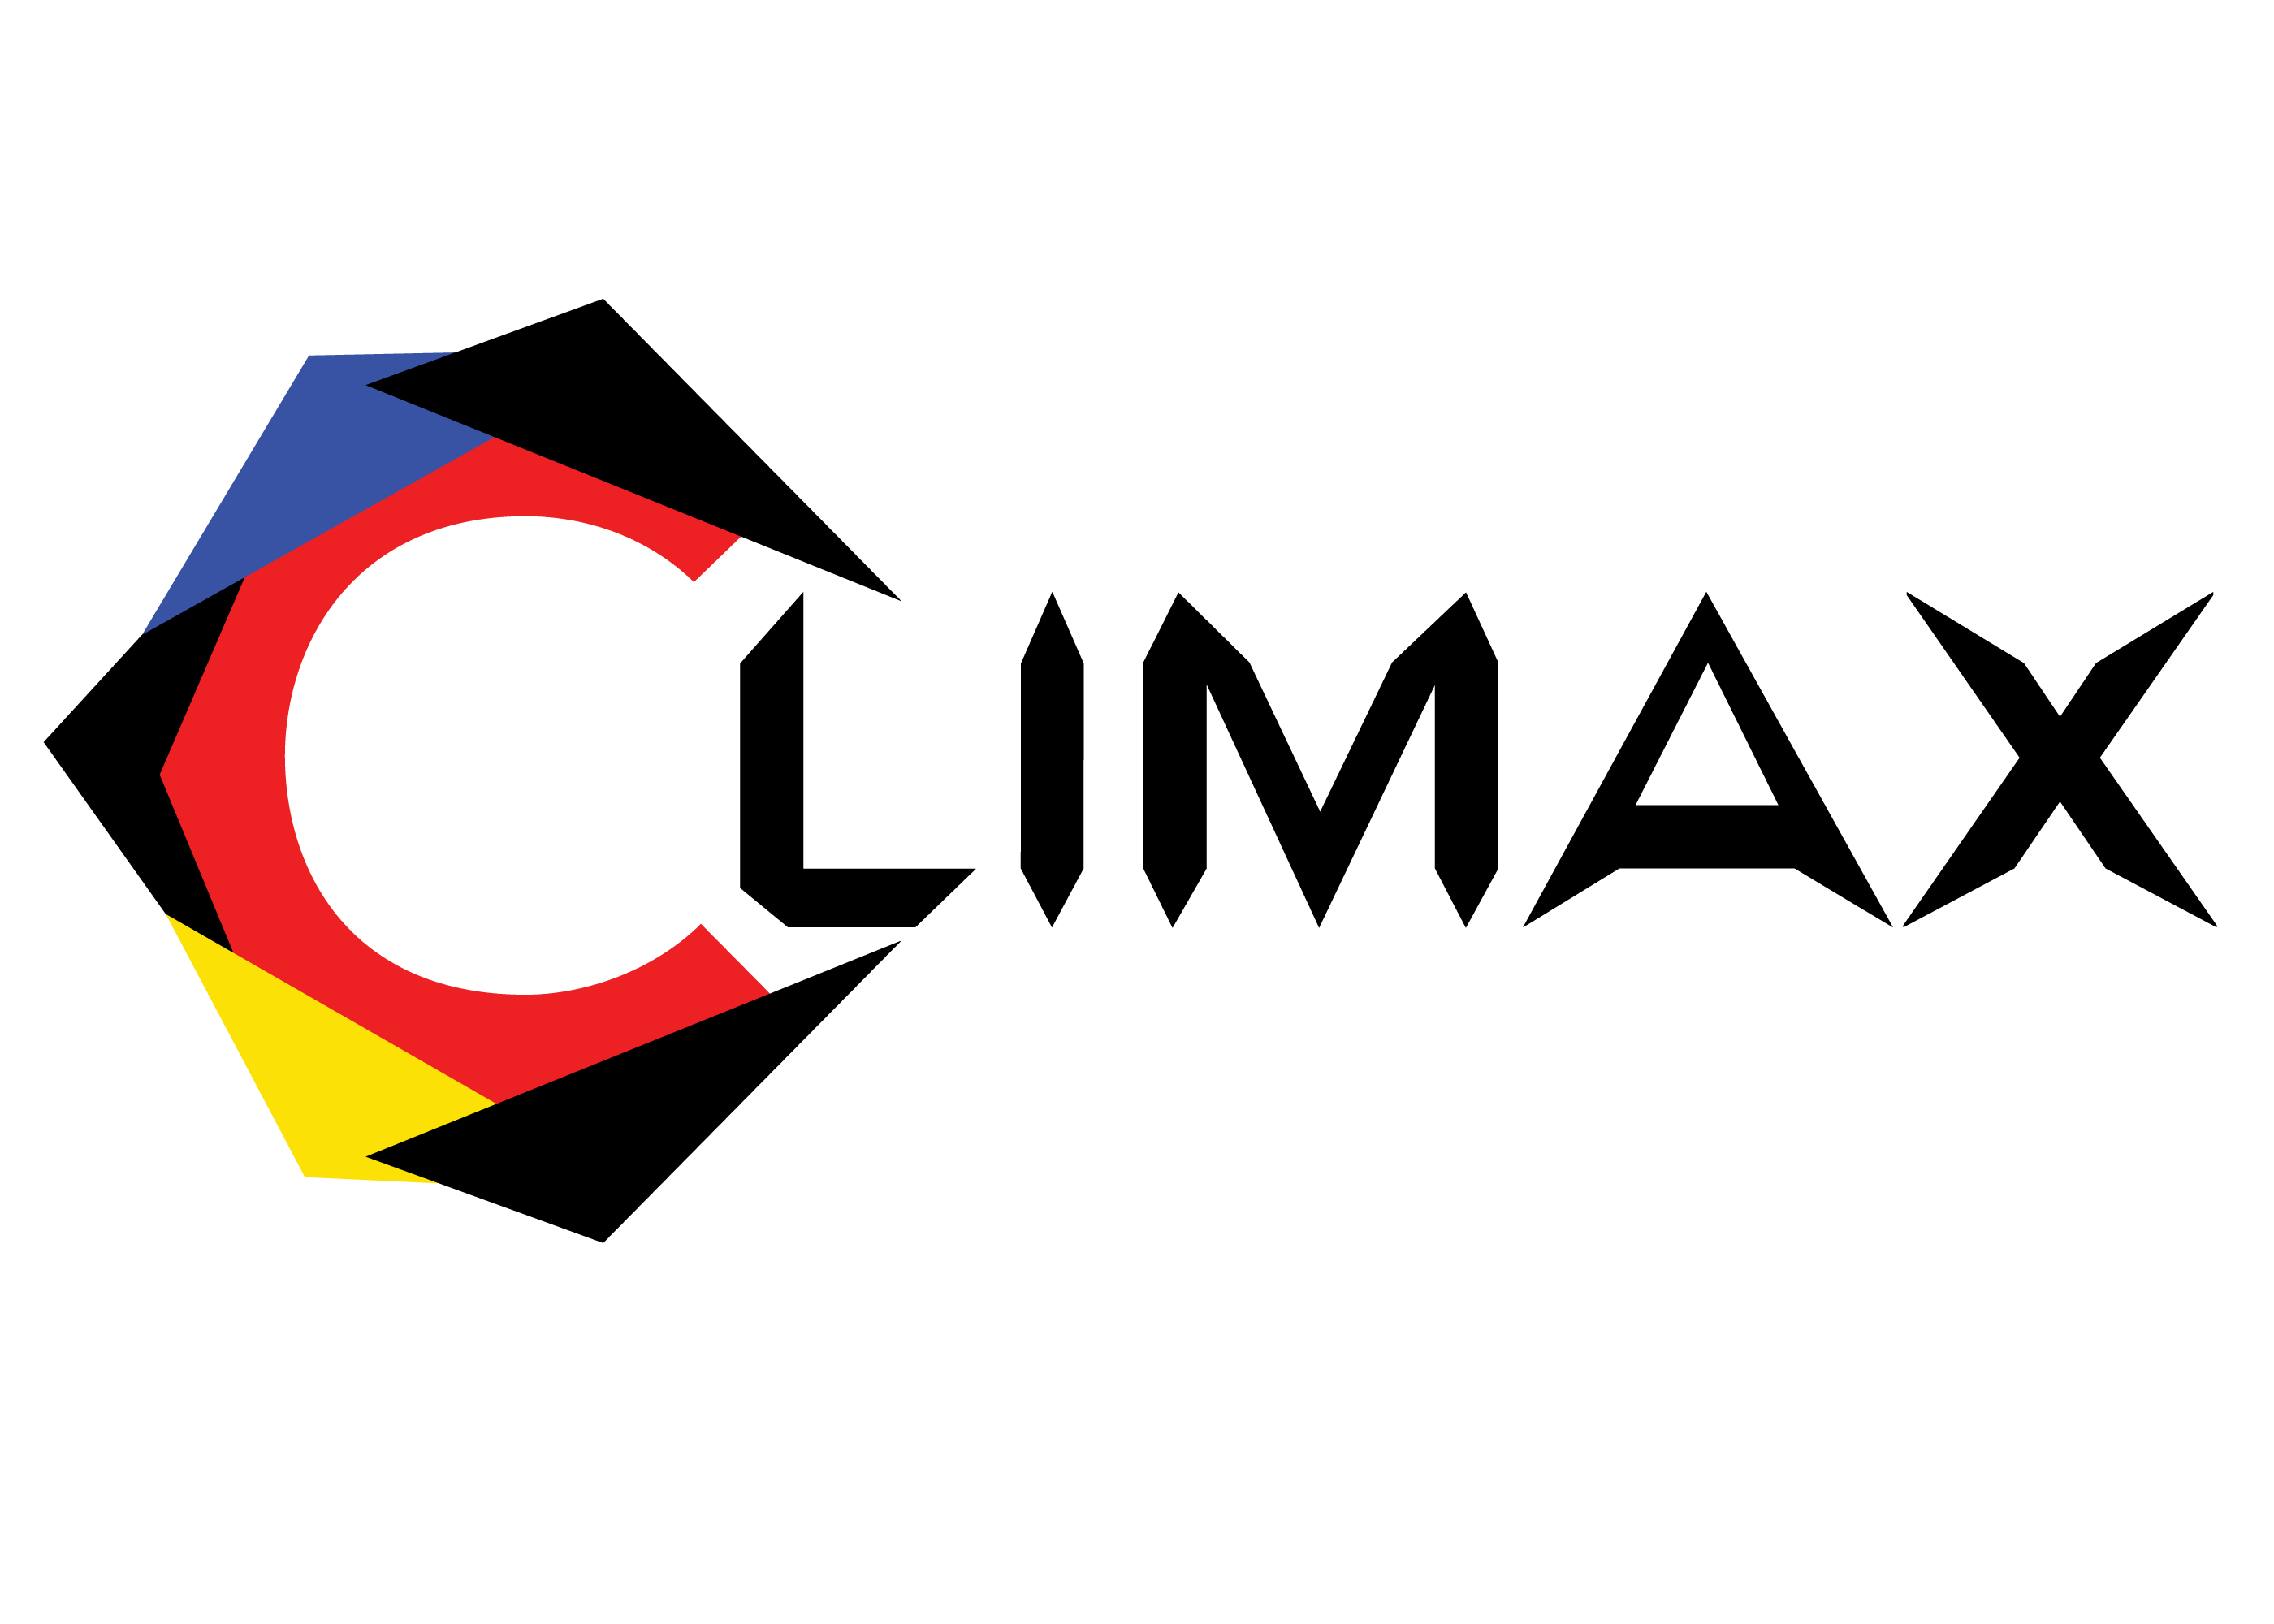 Climax City States HD Wallpaper and Photo